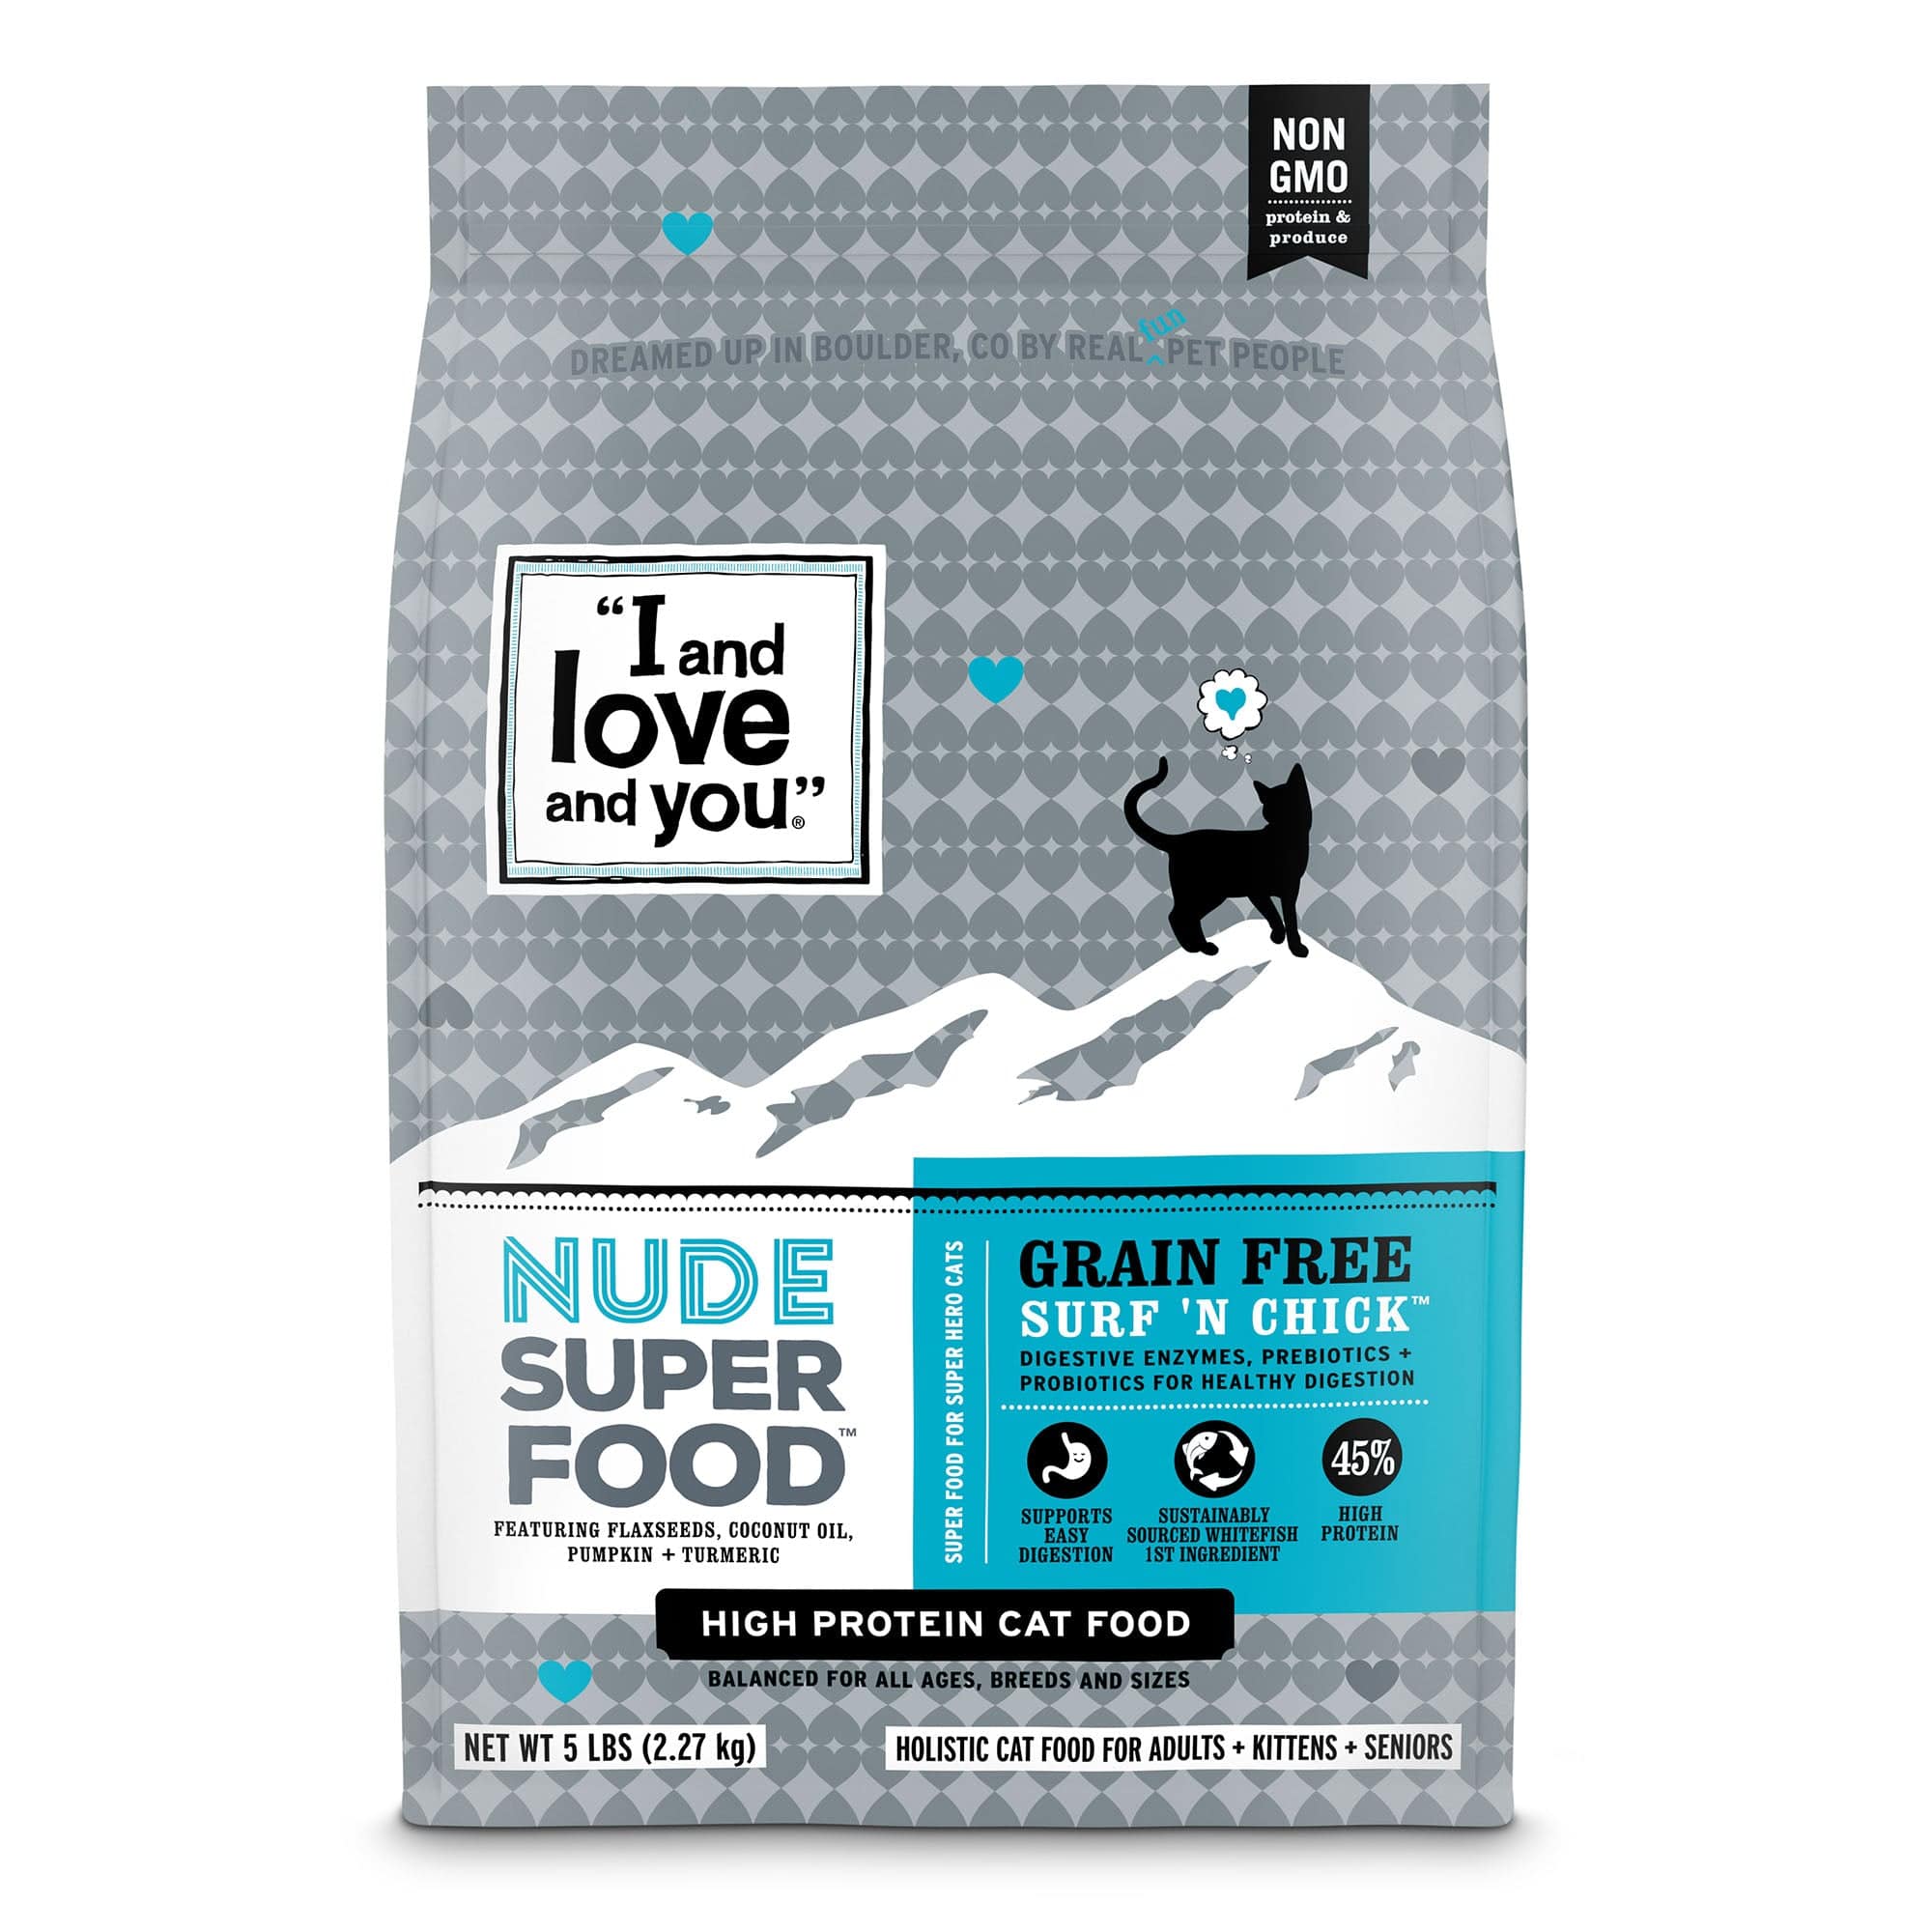 Nude Super Food - Surf 'n Chick bag next to a black cat and a sign with text, showcasing premium cat kibble ingredients.